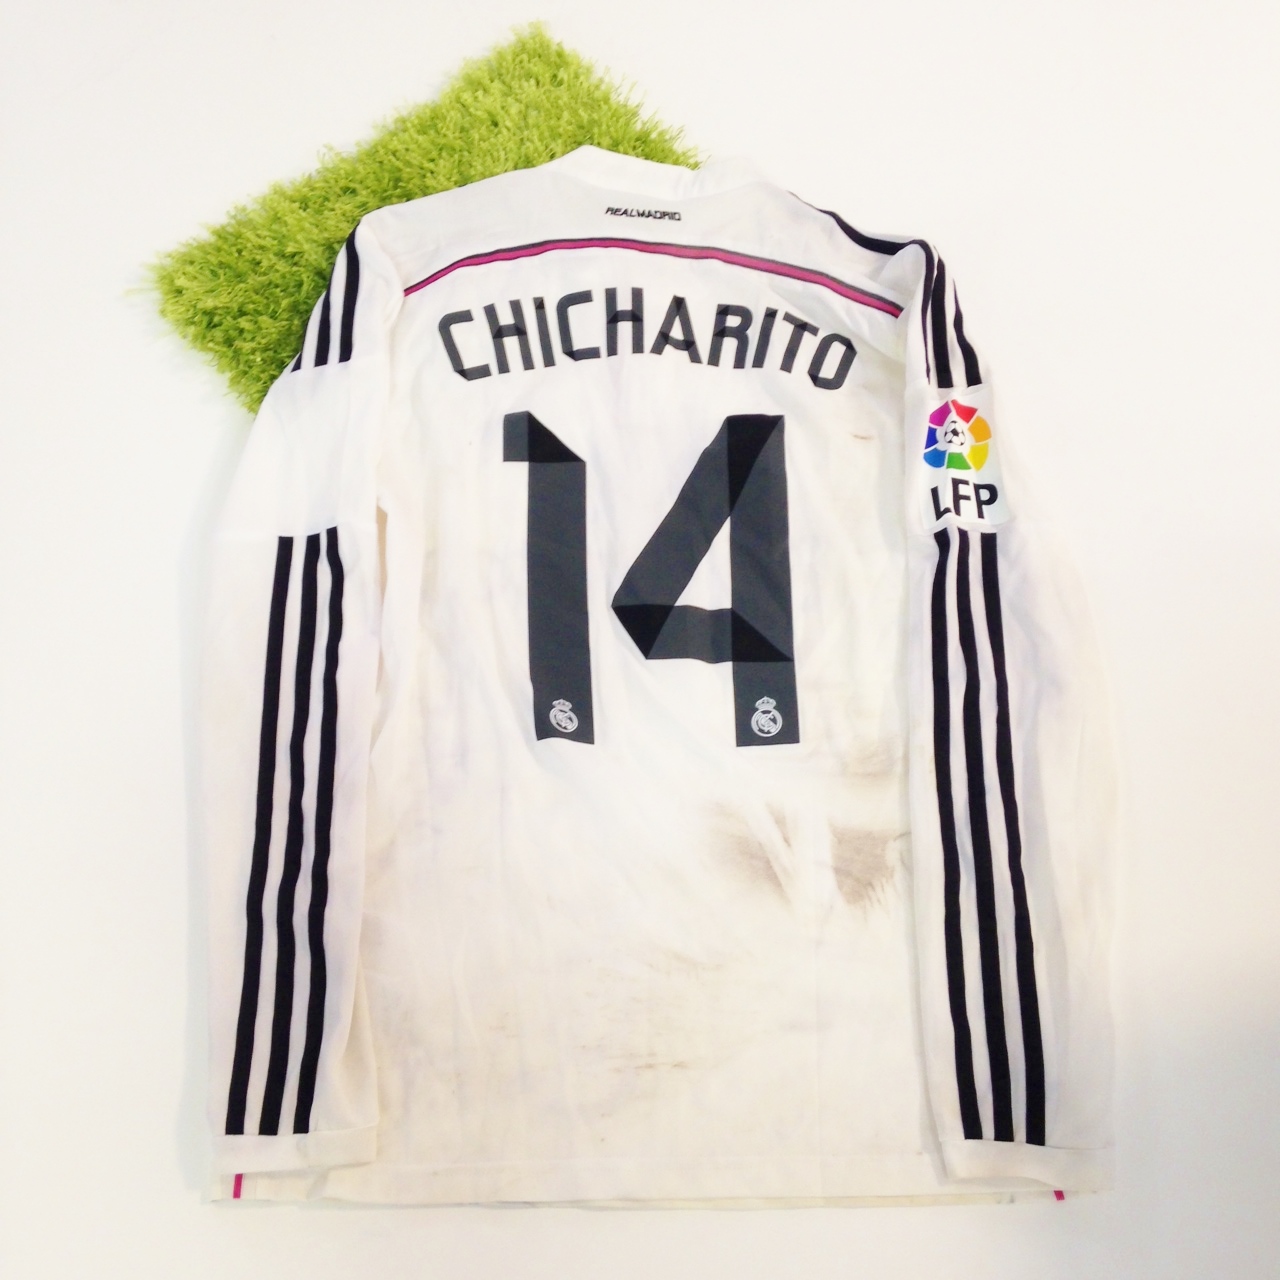 Bid for a signed Chicharito shirt now!